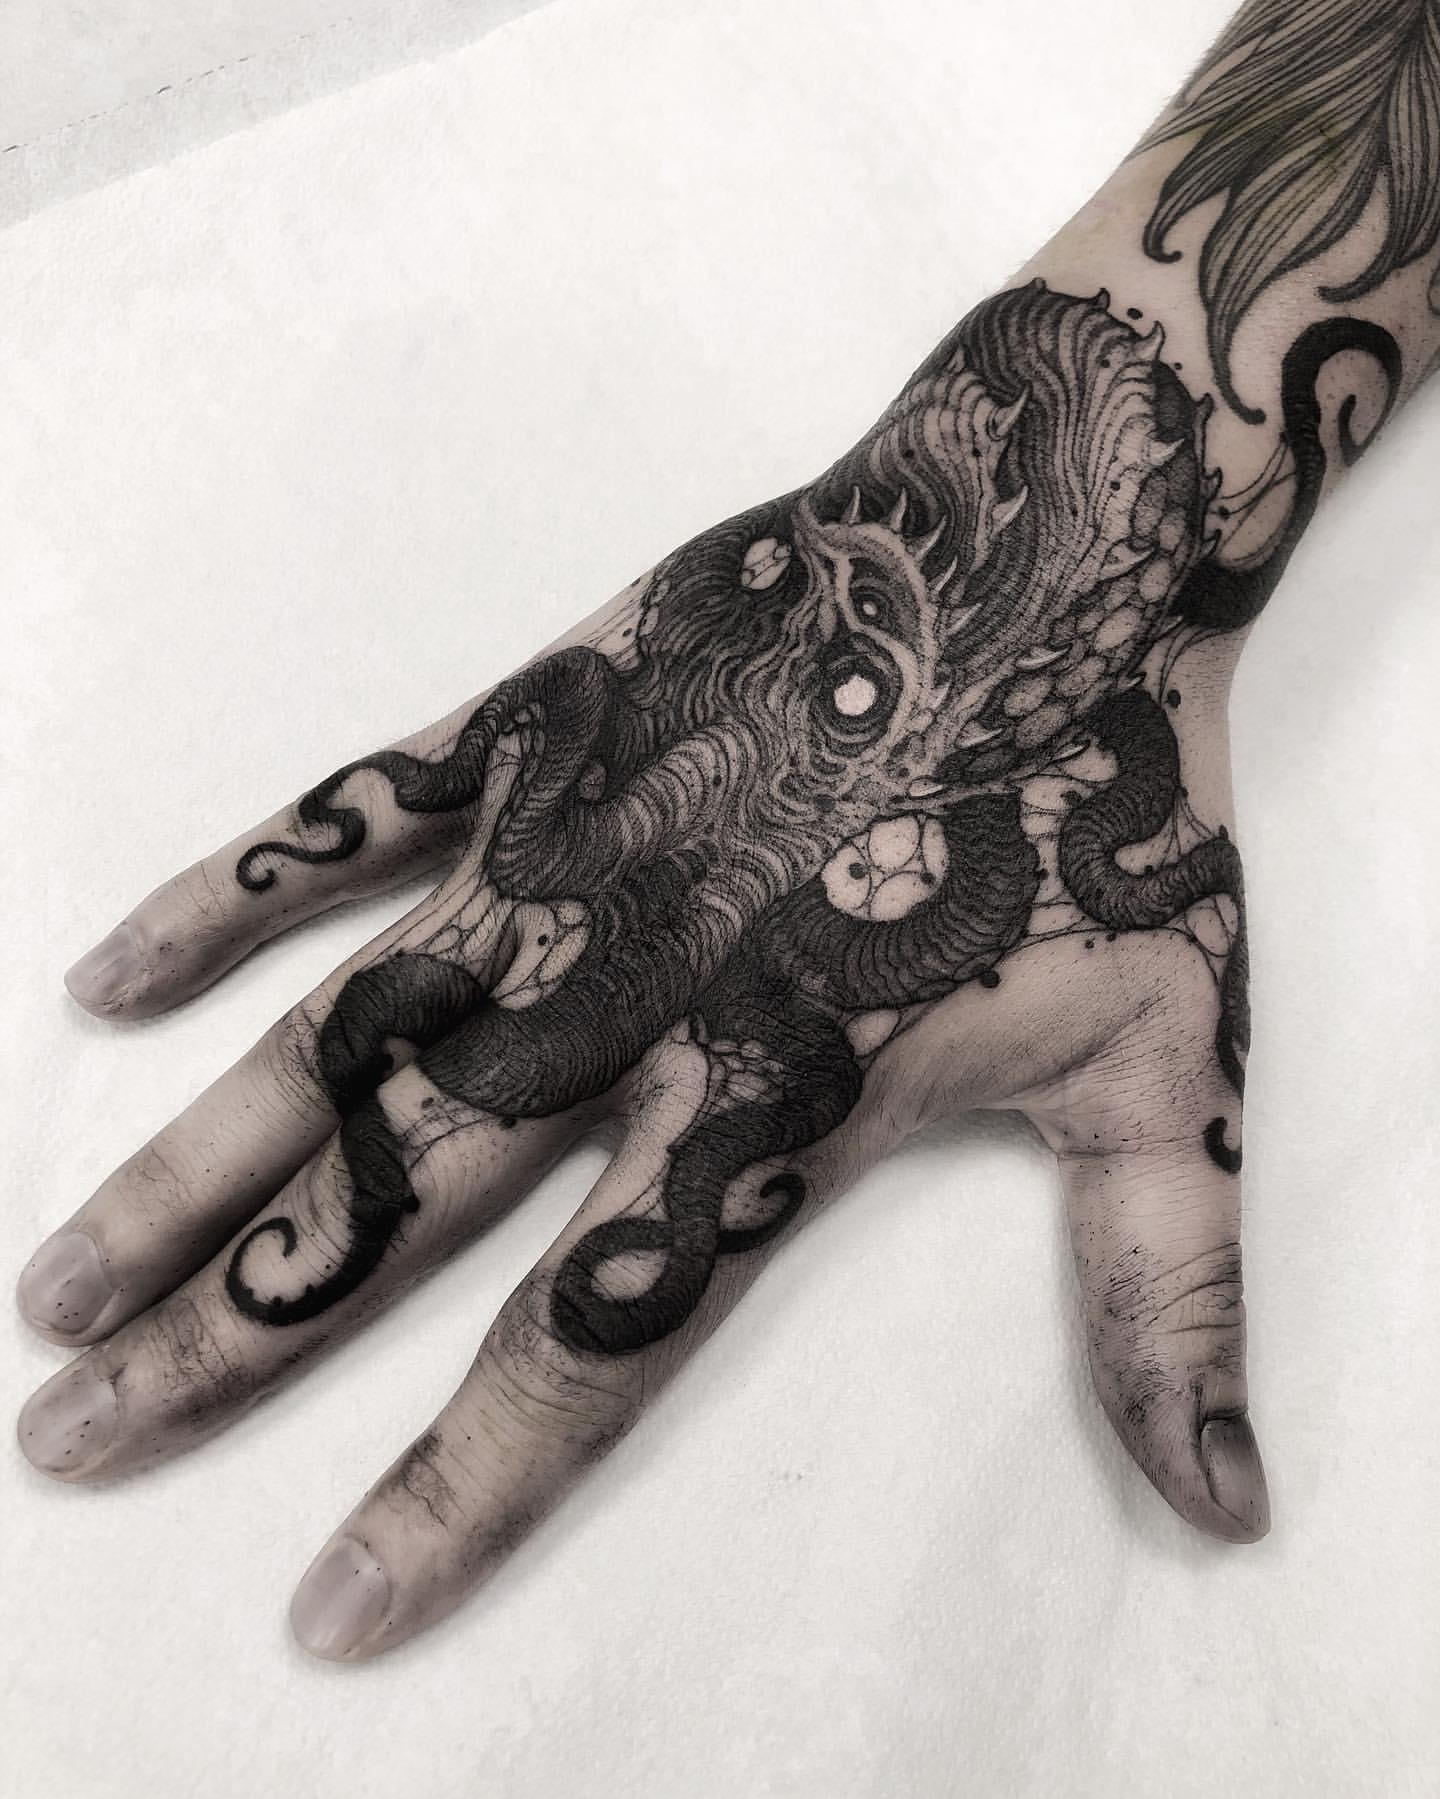 Pin by T! 🔸 on TATTOOS & PIERCINGS | Hand tattoos for guys, Tattoo ideas  males, Tattoos for guys